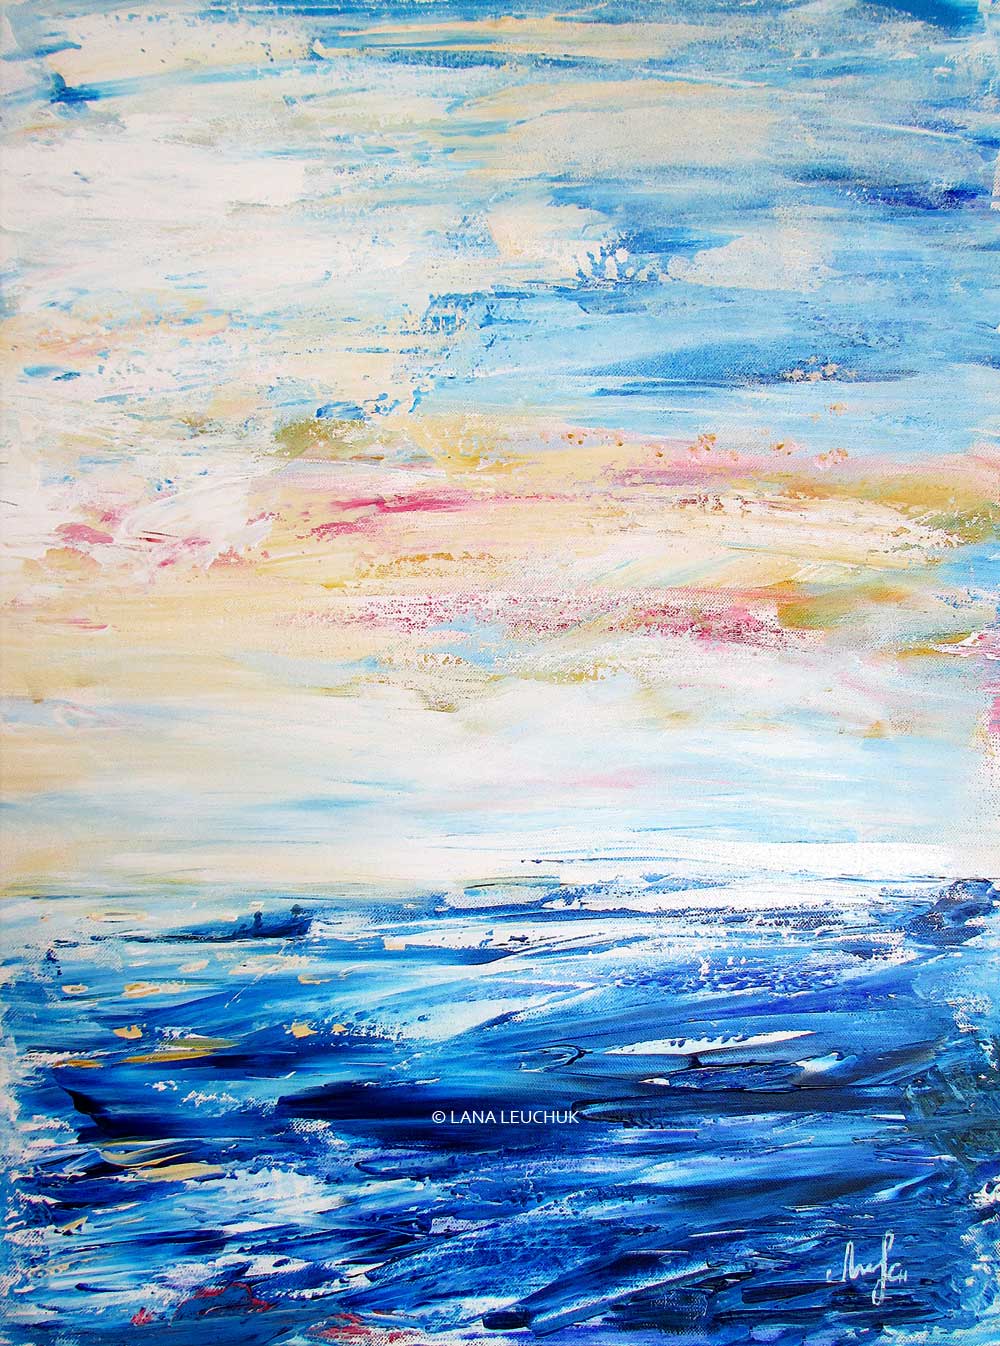 Cooling-dip-in-the-archipelago-art-by-Lana-Leuchuk-acrylic-painting